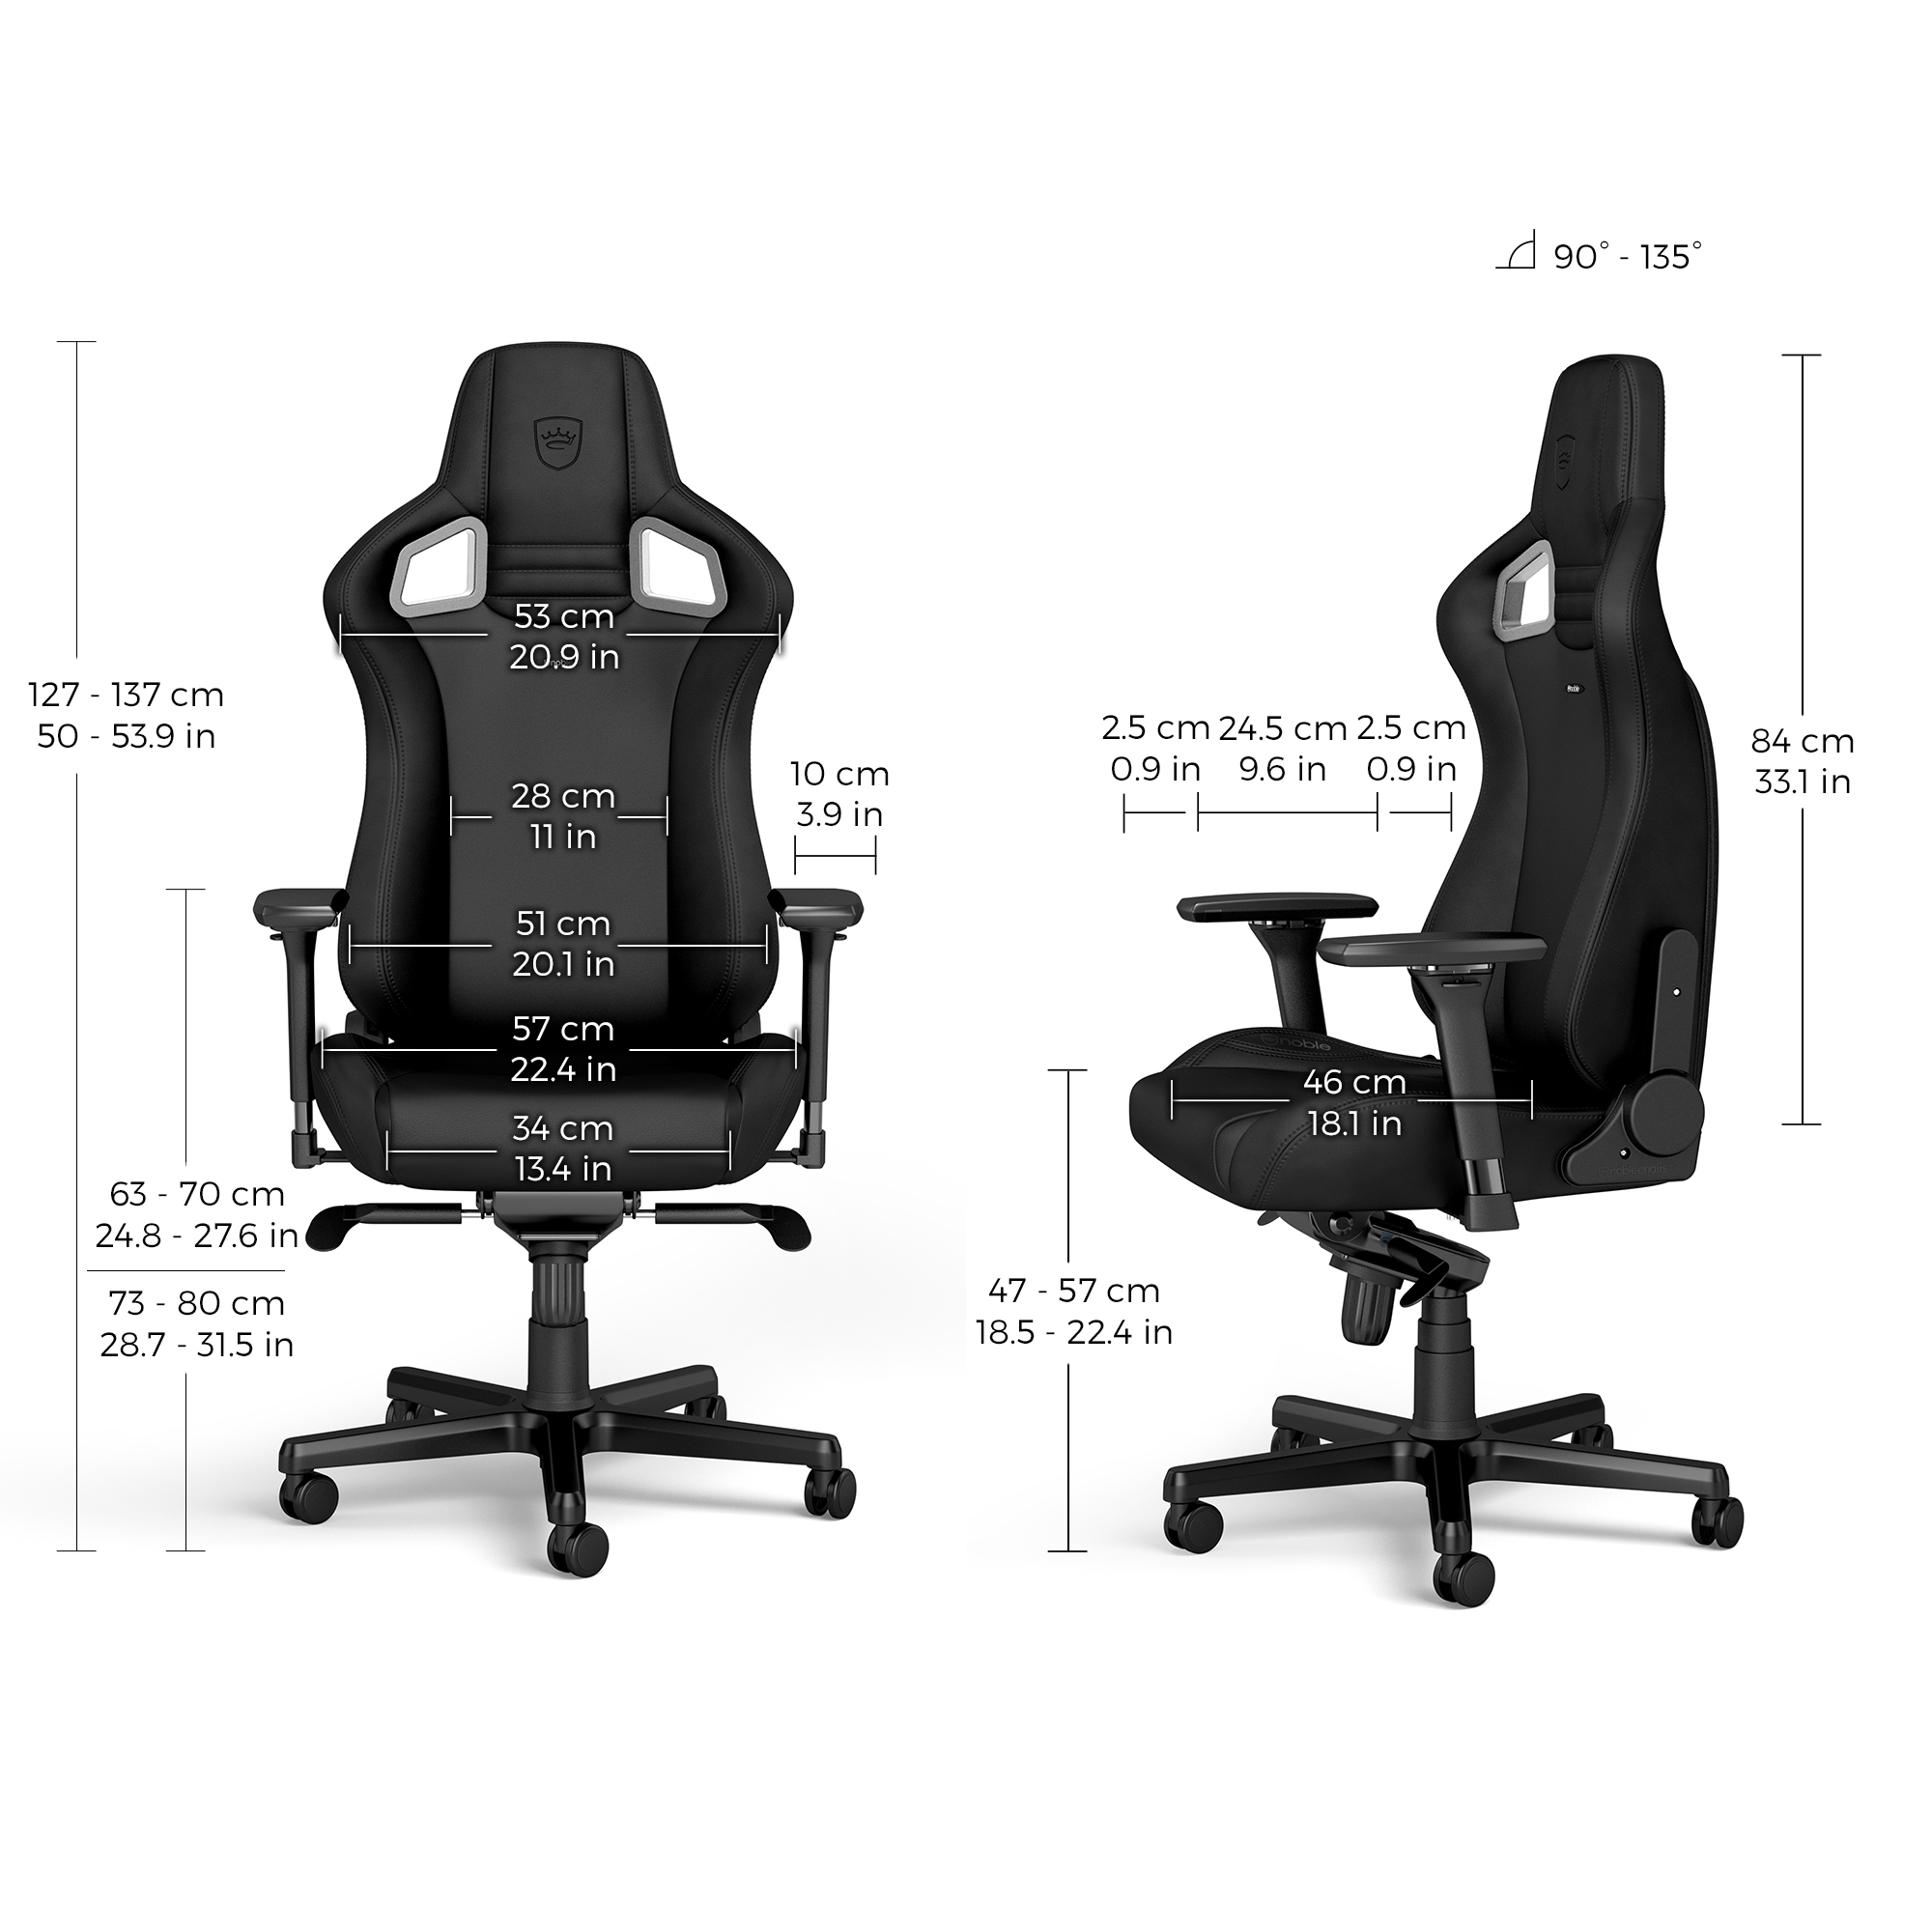 noblechairs - noblechairs EPIC Gaming Chair - Black Edition